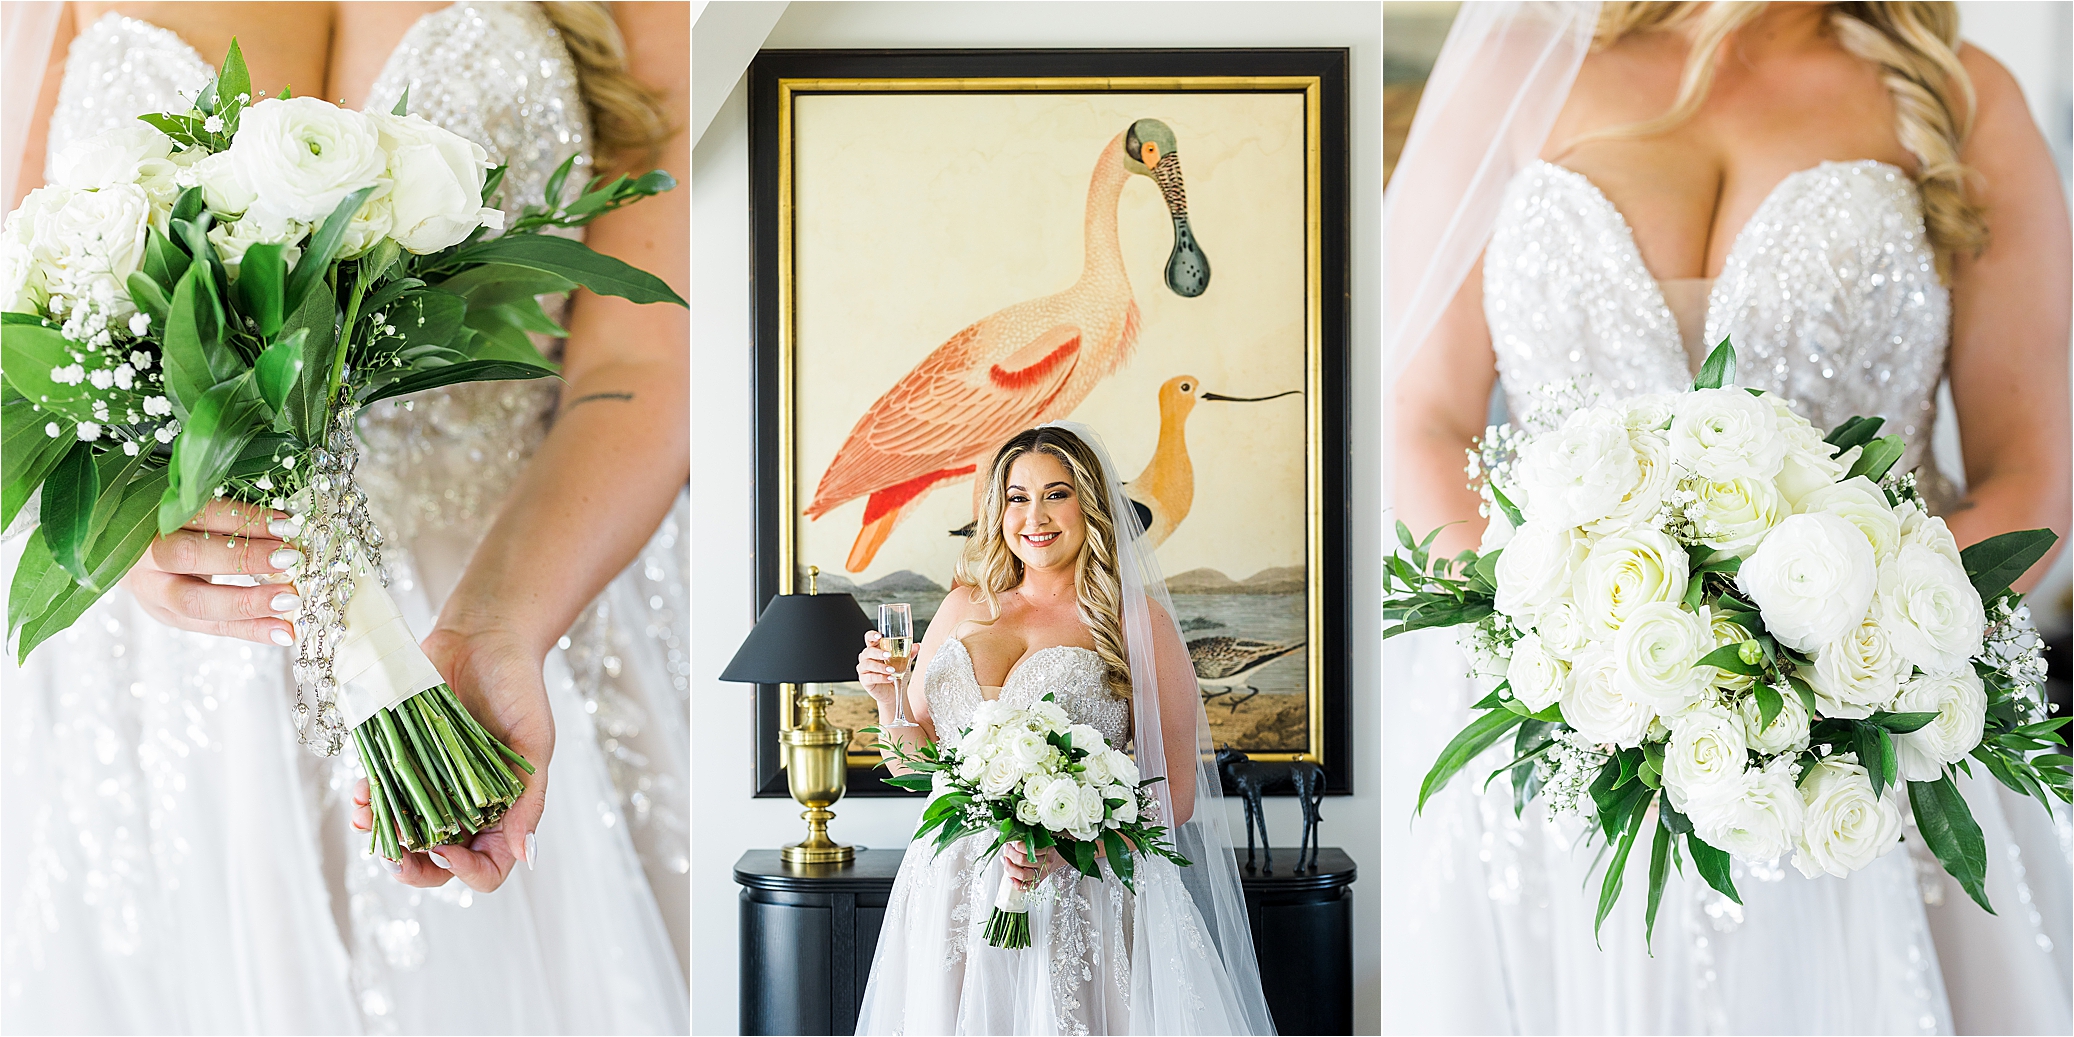 A bride drinks champagne on her wedding day at The Redberry Estate in San Antonio, Texas